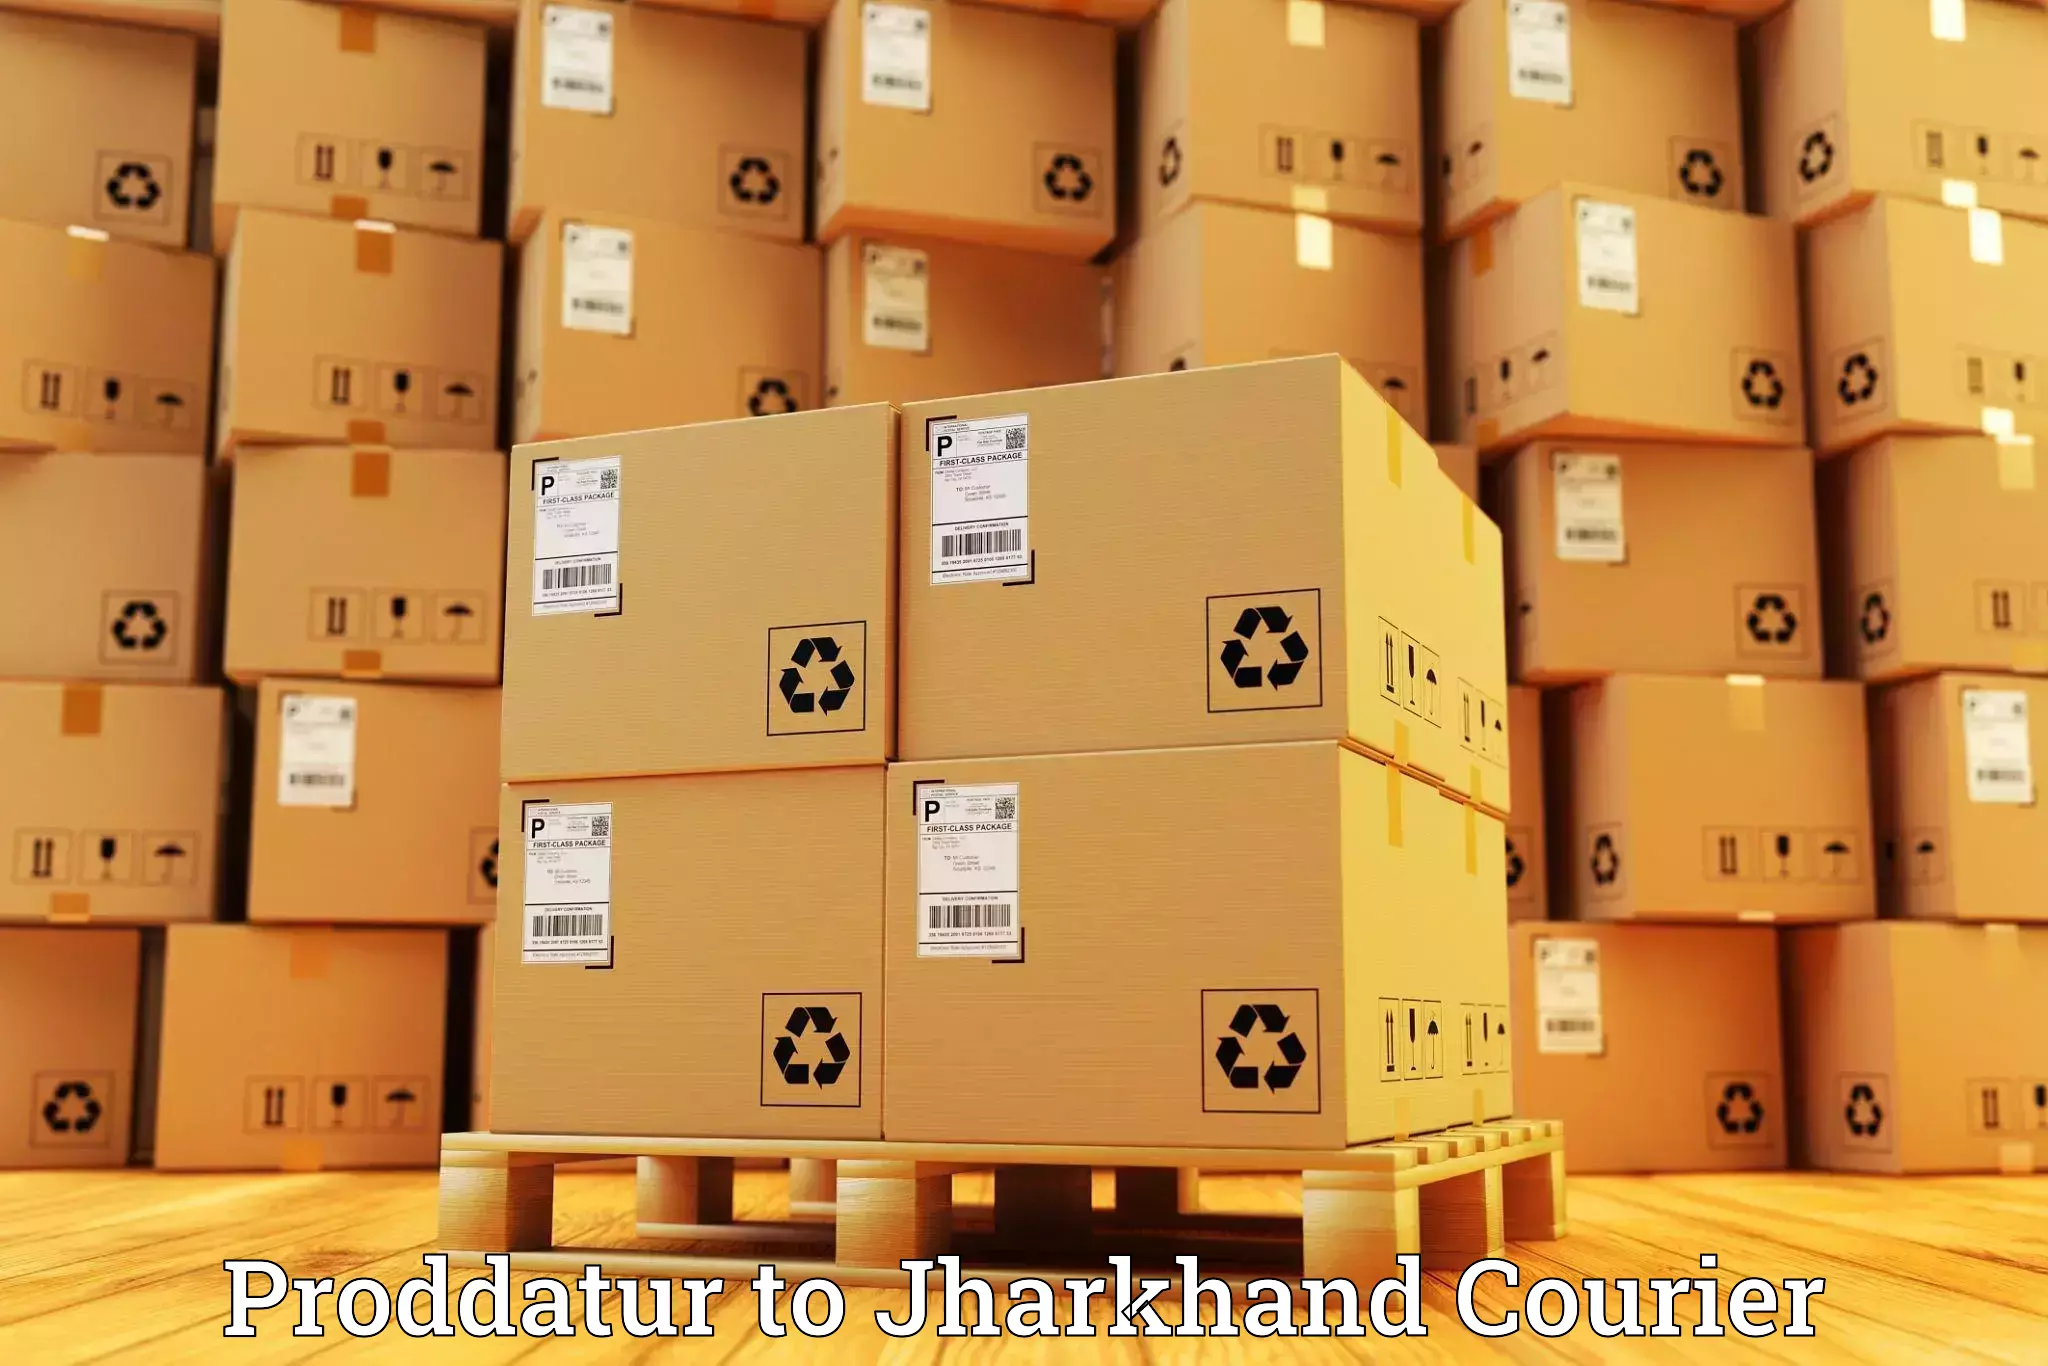 Luggage shipment tracking in Proddatur to Jharkhand